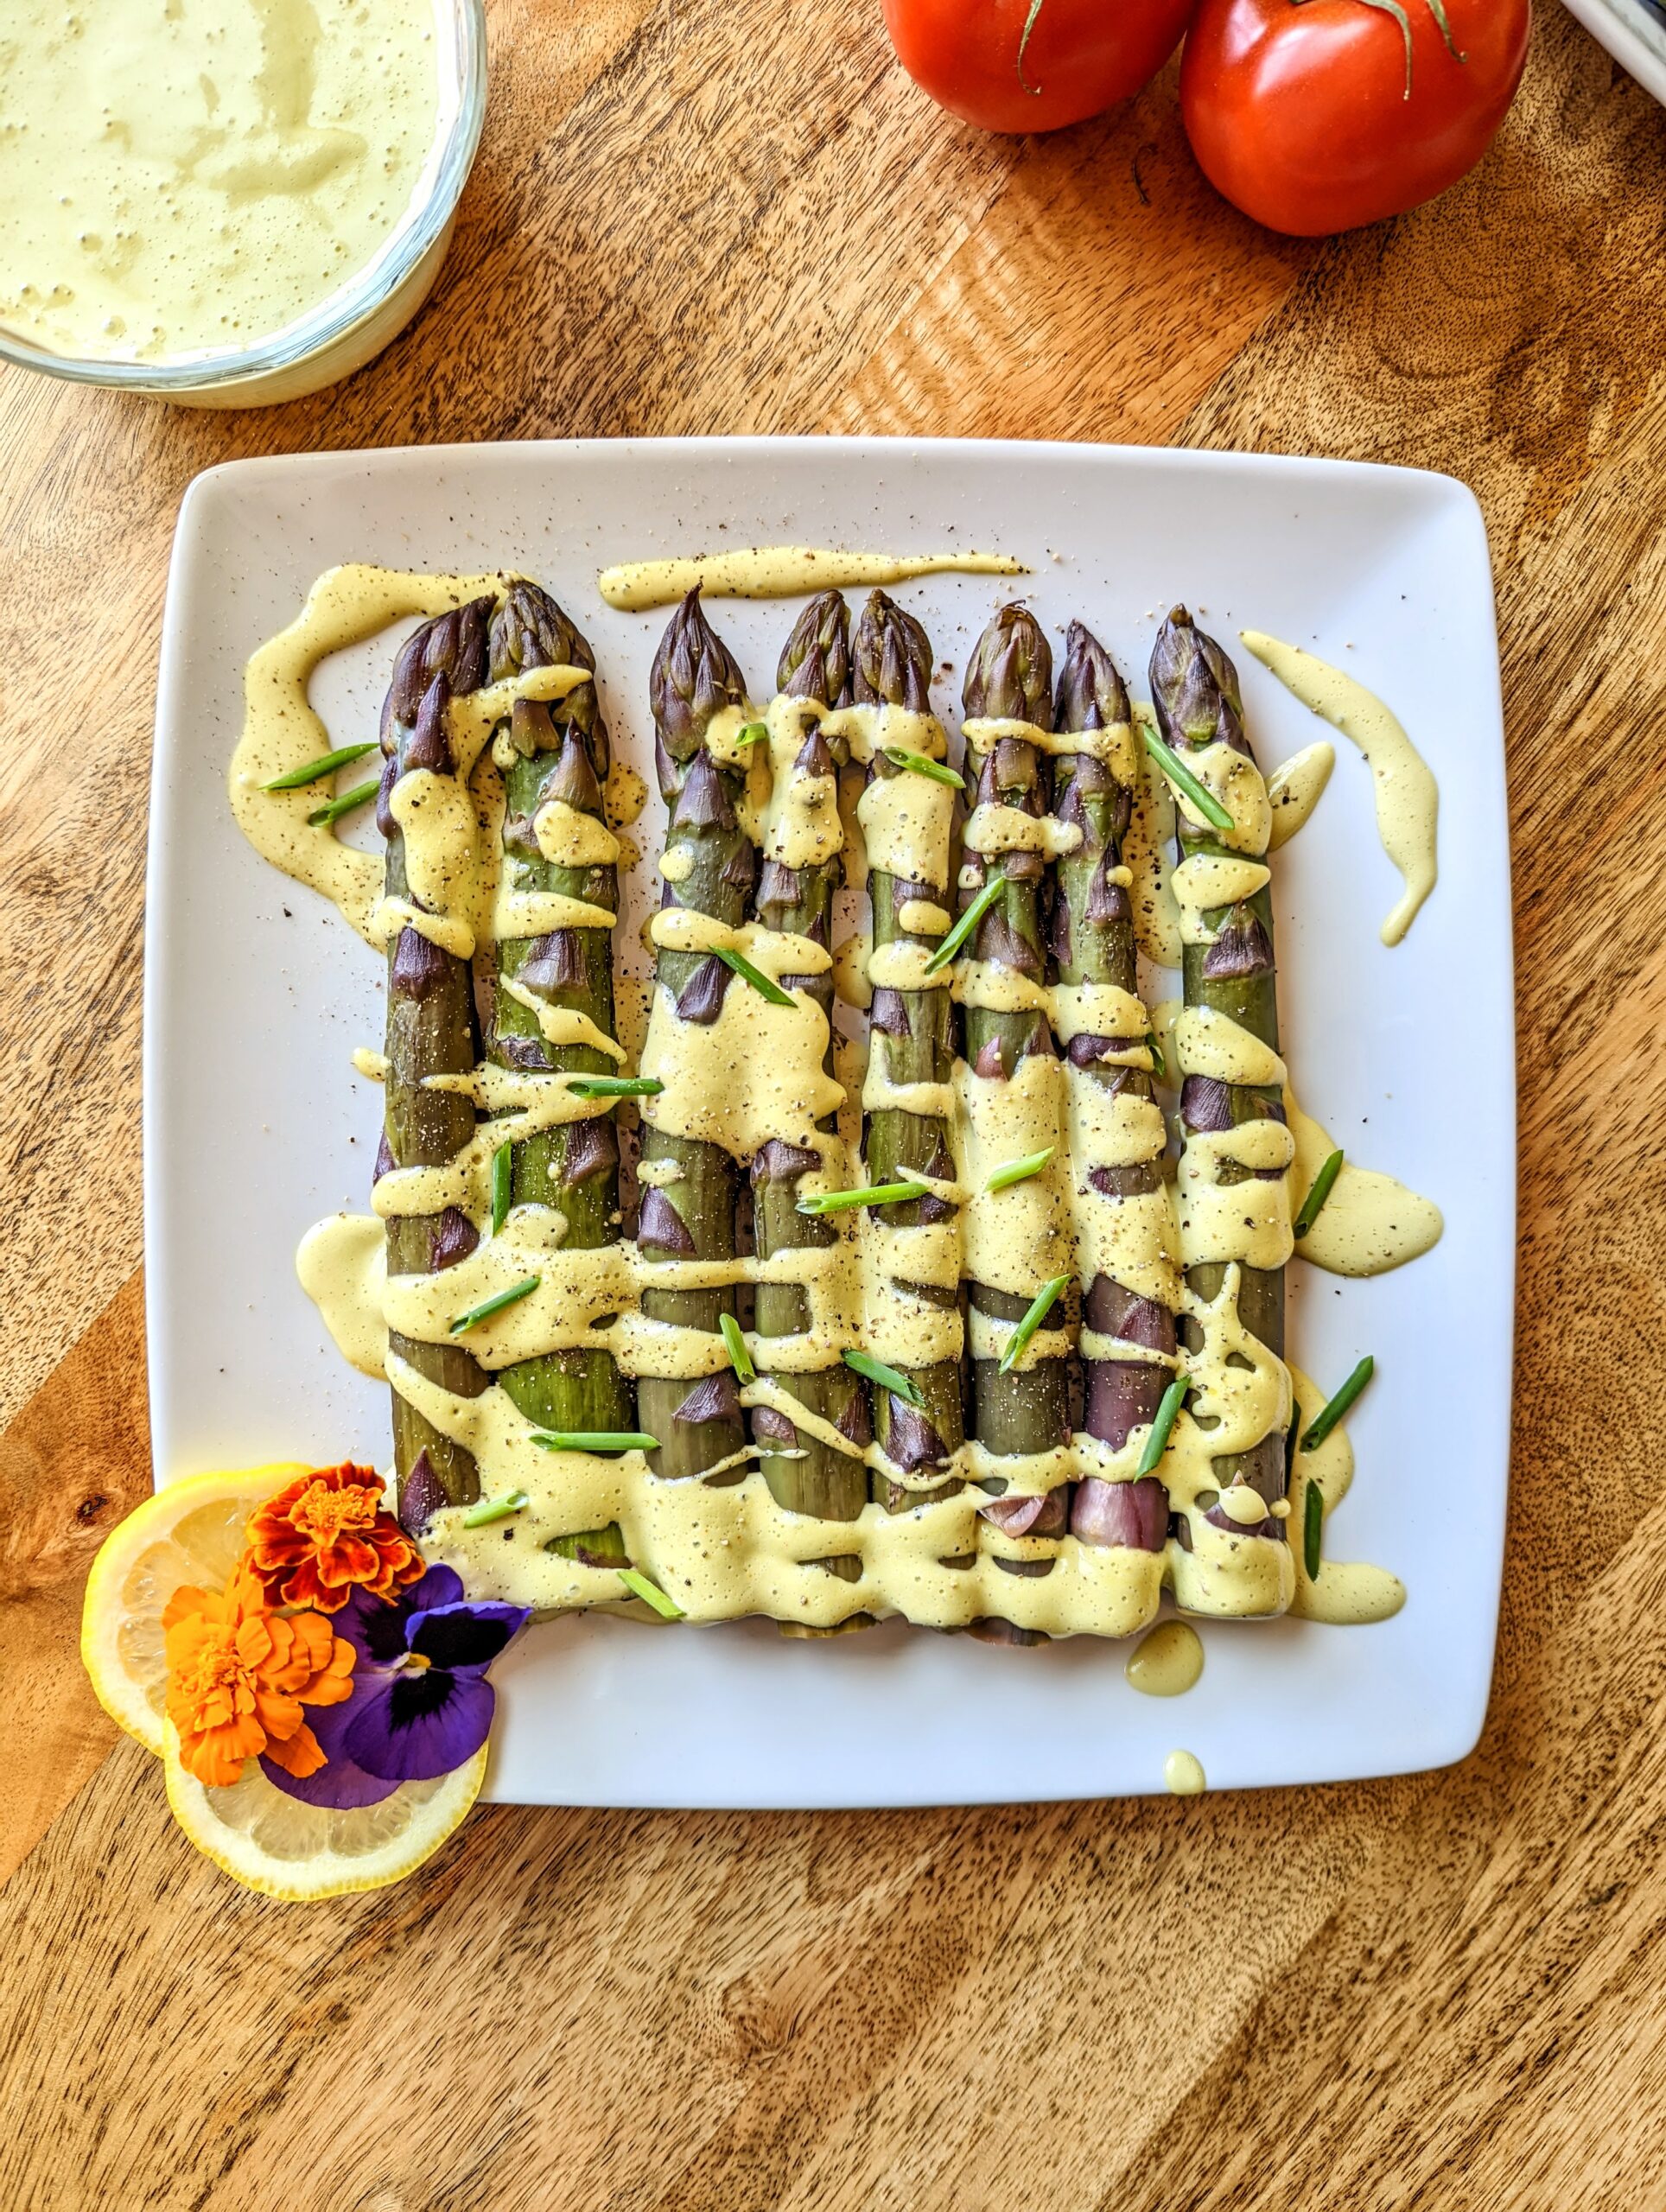 A plate of steamed purple asparagus with tarragon and chive Hollandaise drizzled overtop; garnished with lemon slices and purple and orange edible flowers..